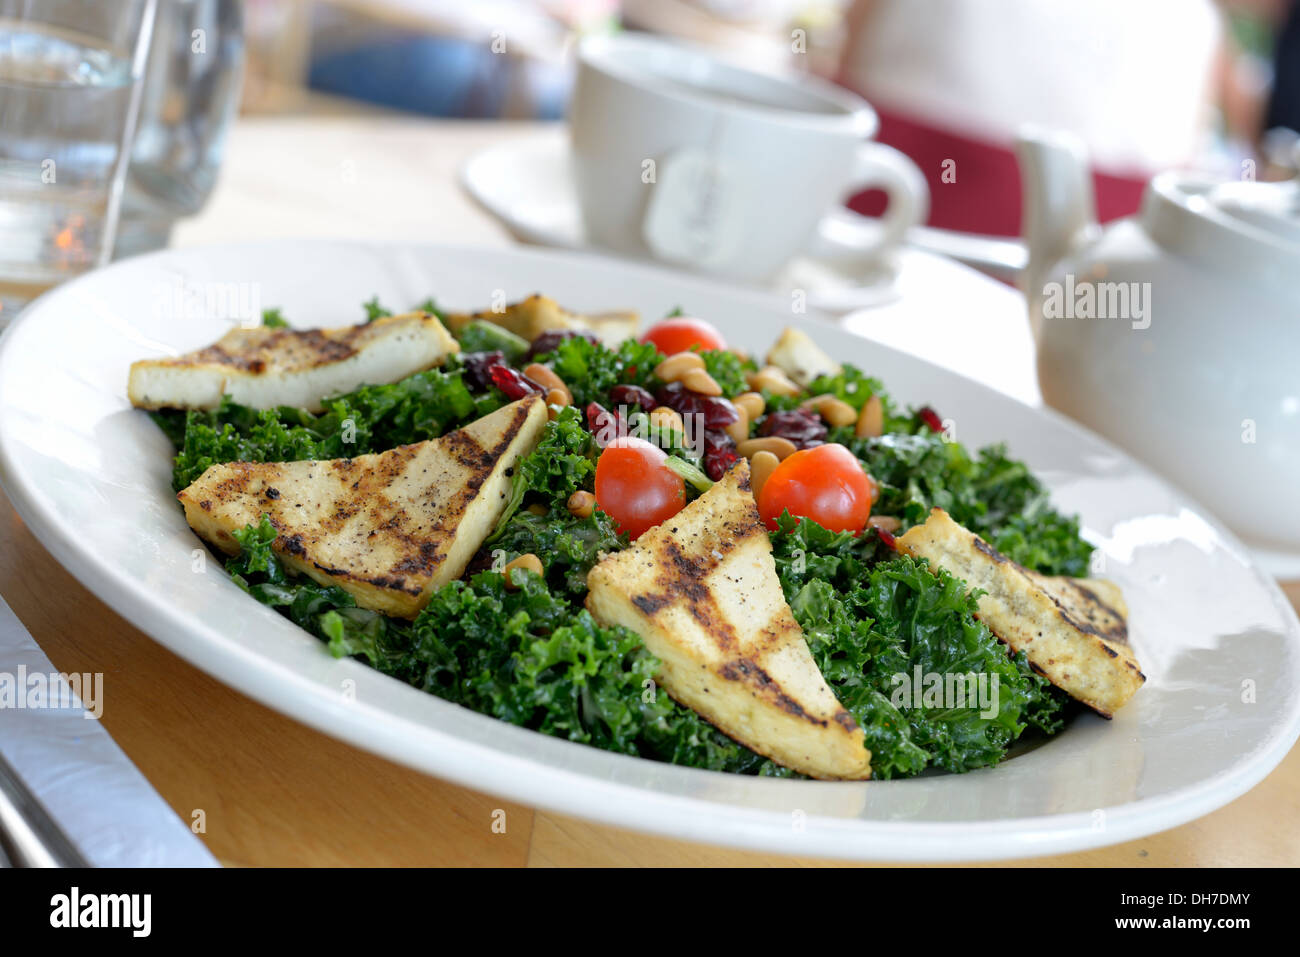 Babette’s is a restaurant in East Hampton NY Serving breakfast, lunch and dinner, using organic, local and seasonal ingredients. Stock Photo